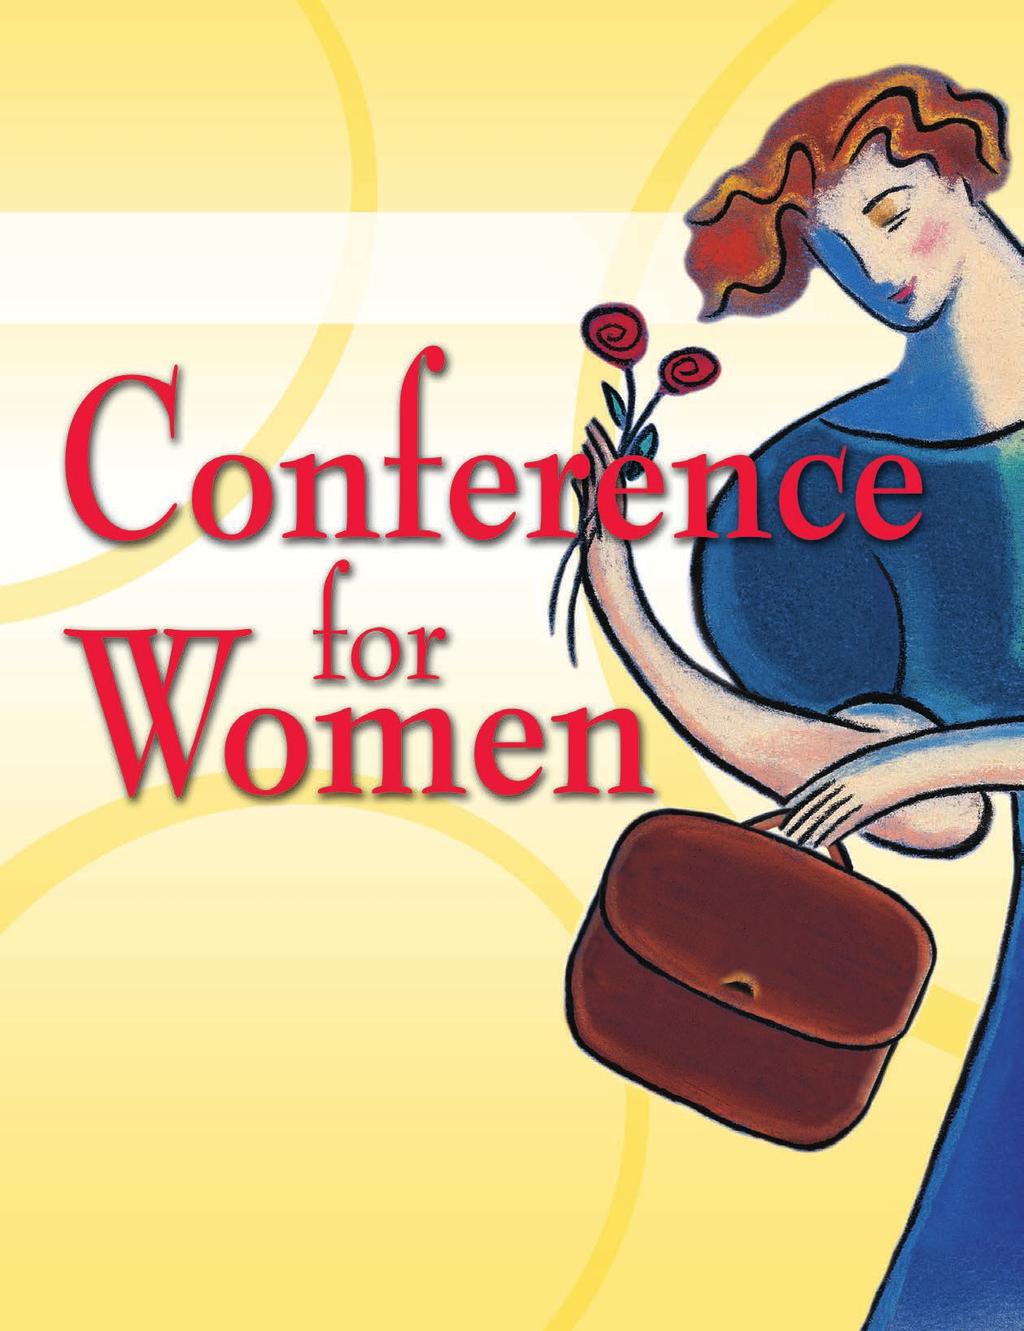 Don t miss this brand-new conference filled with breakthrough success strategies and insights for women of all ages!